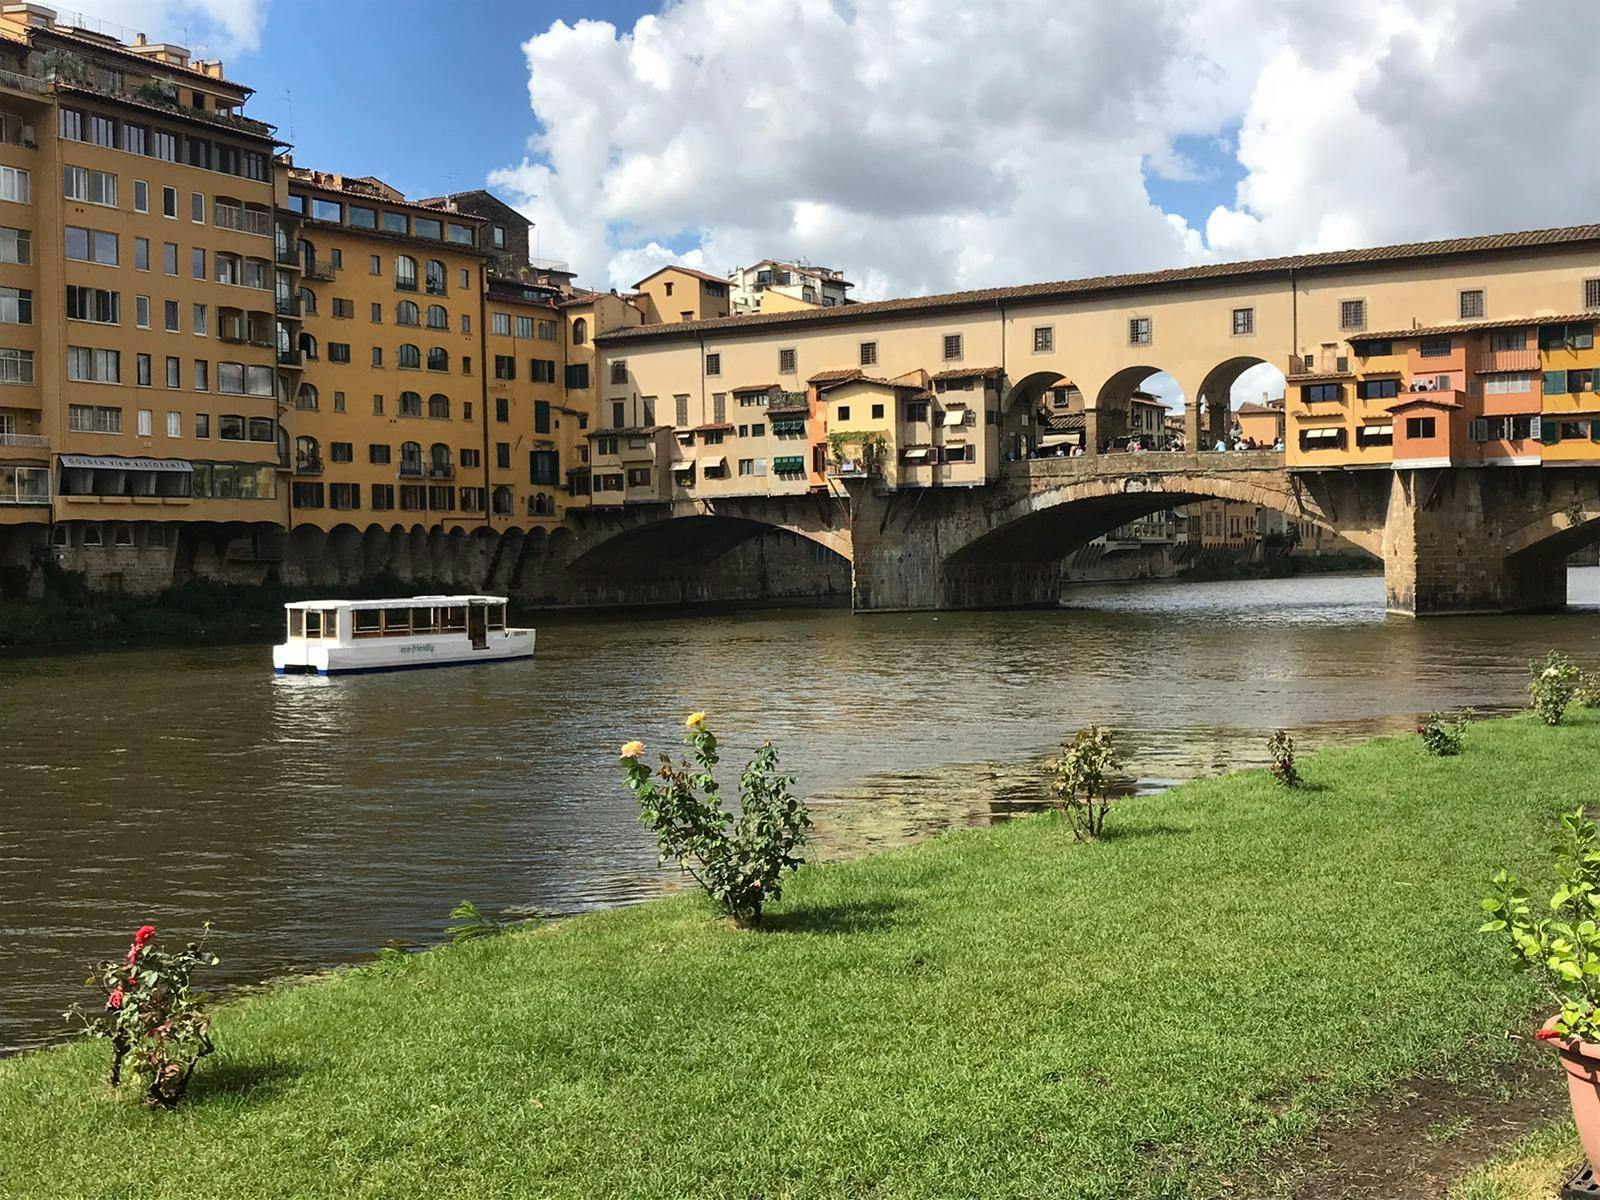 Florence walking tour with Arno river e-boat cruise